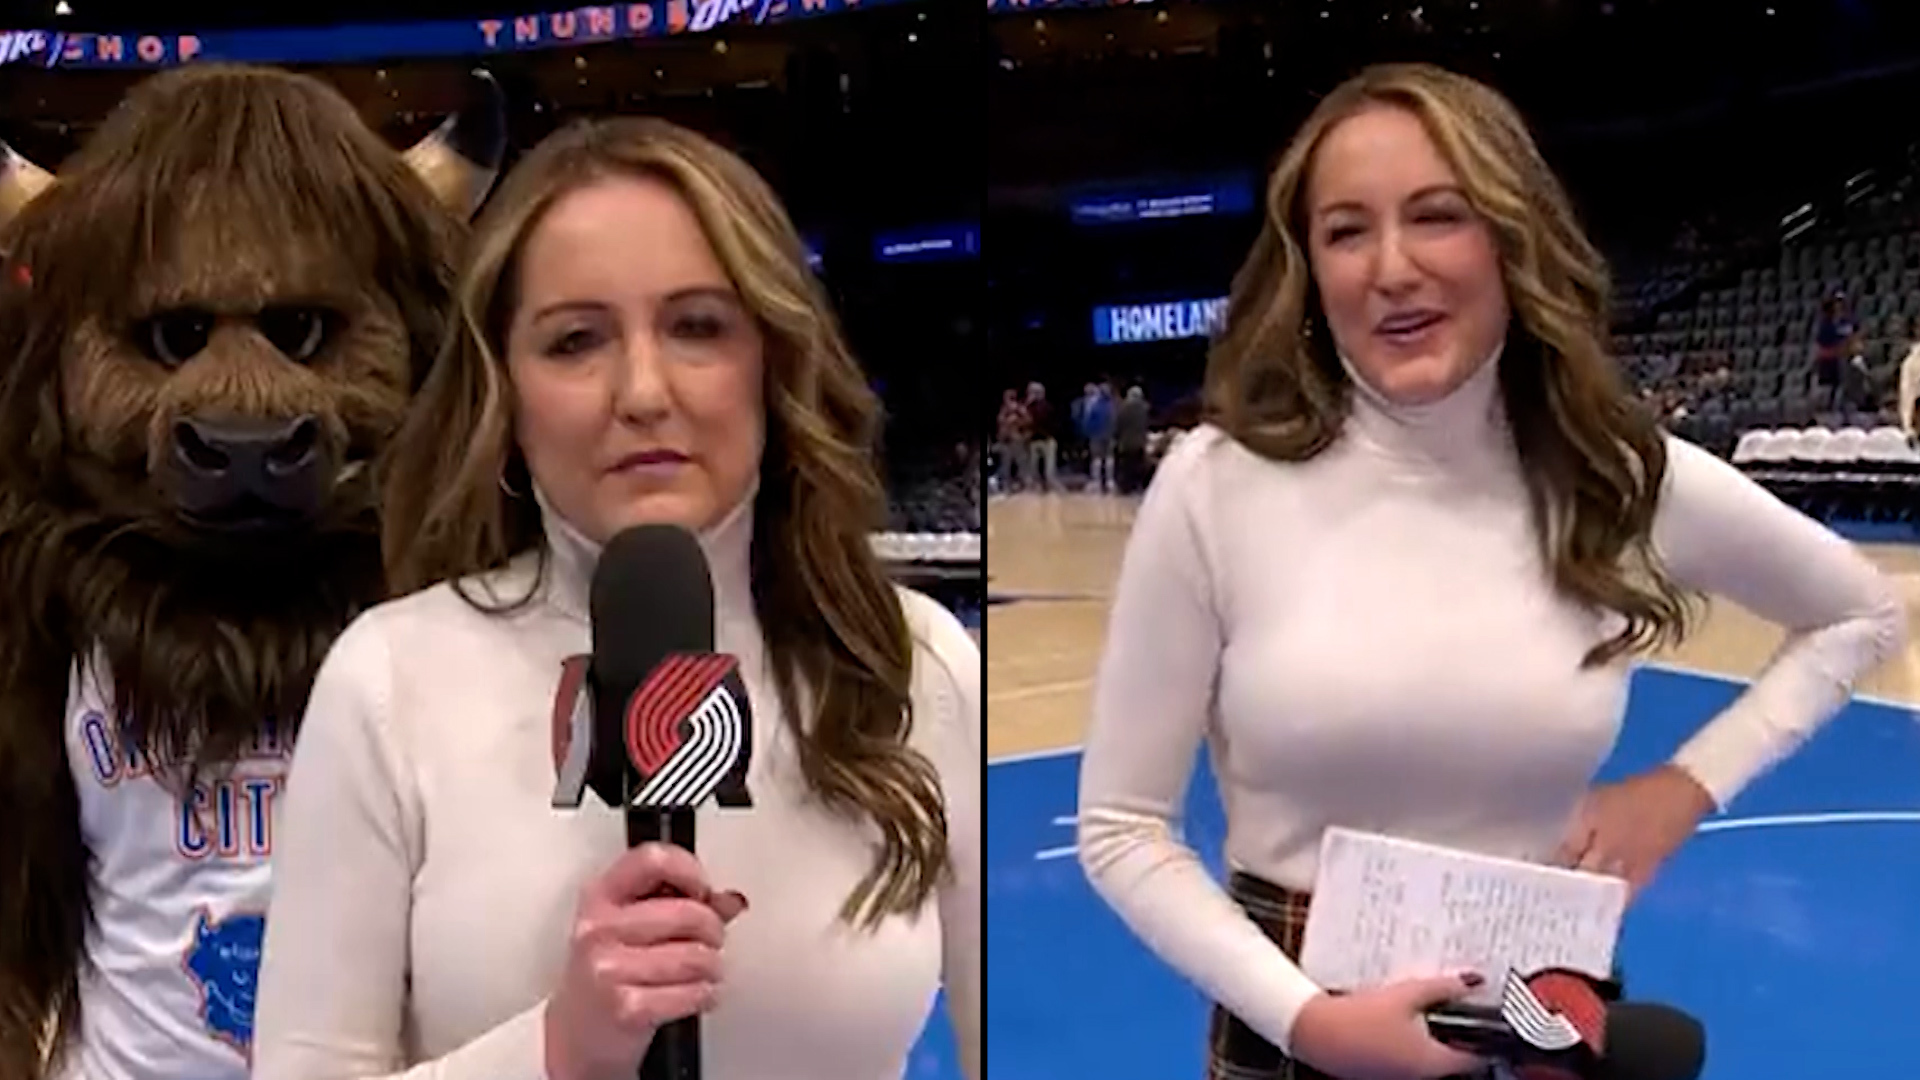 NBA mascot scares reporter live, she hits him with microphone